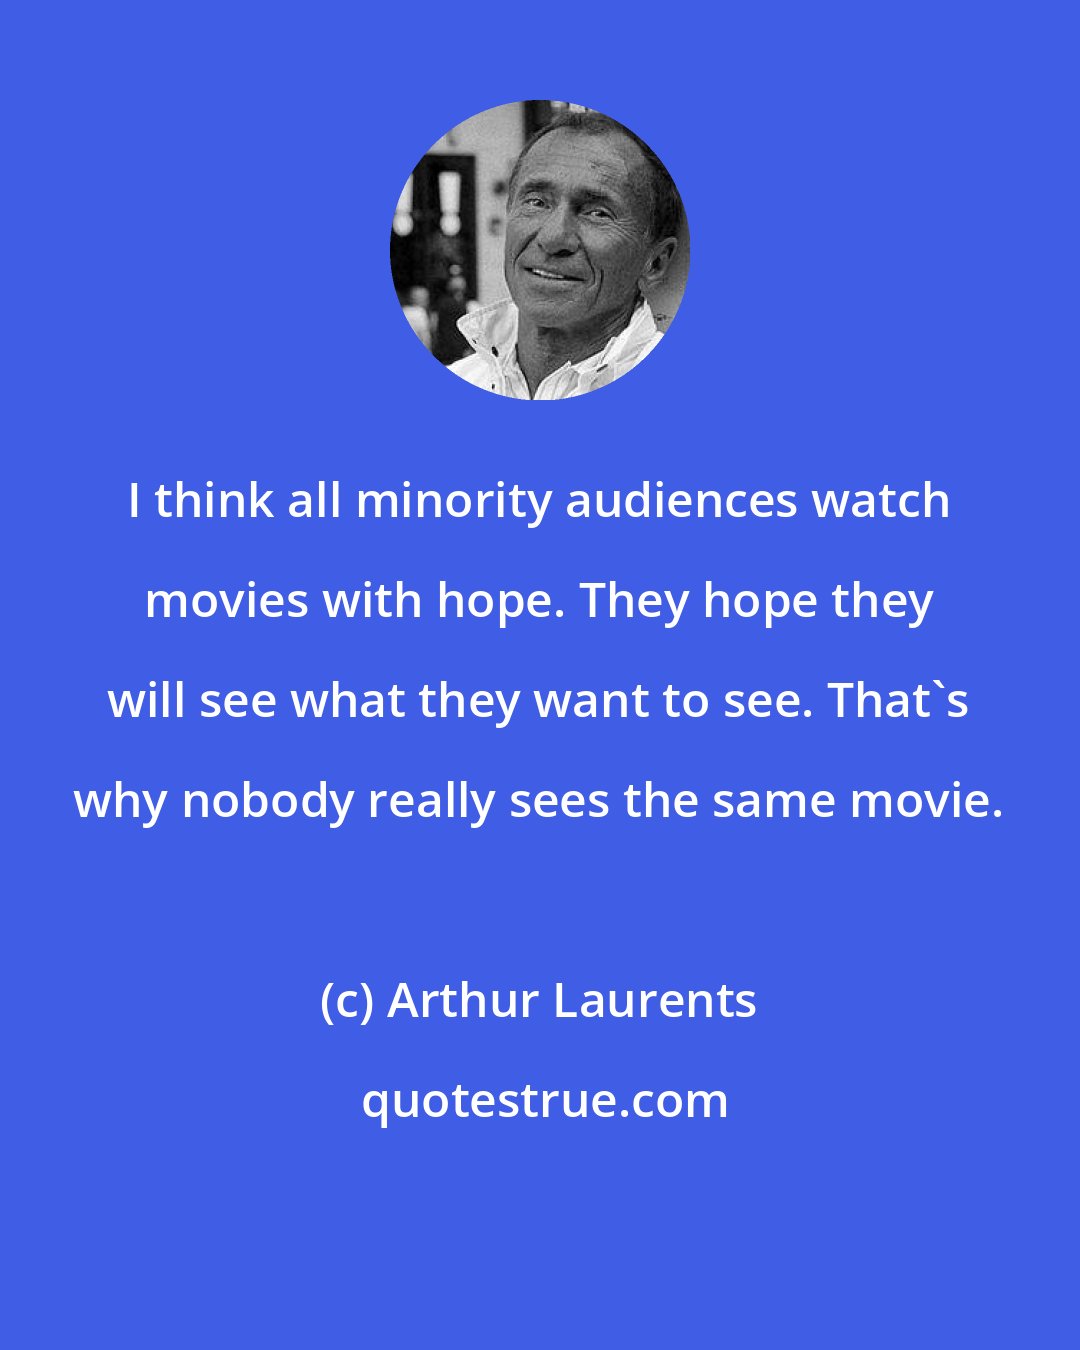 Arthur Laurents: I think all minority audiences watch movies with hope. They hope they will see what they want to see. That's why nobody really sees the same movie.